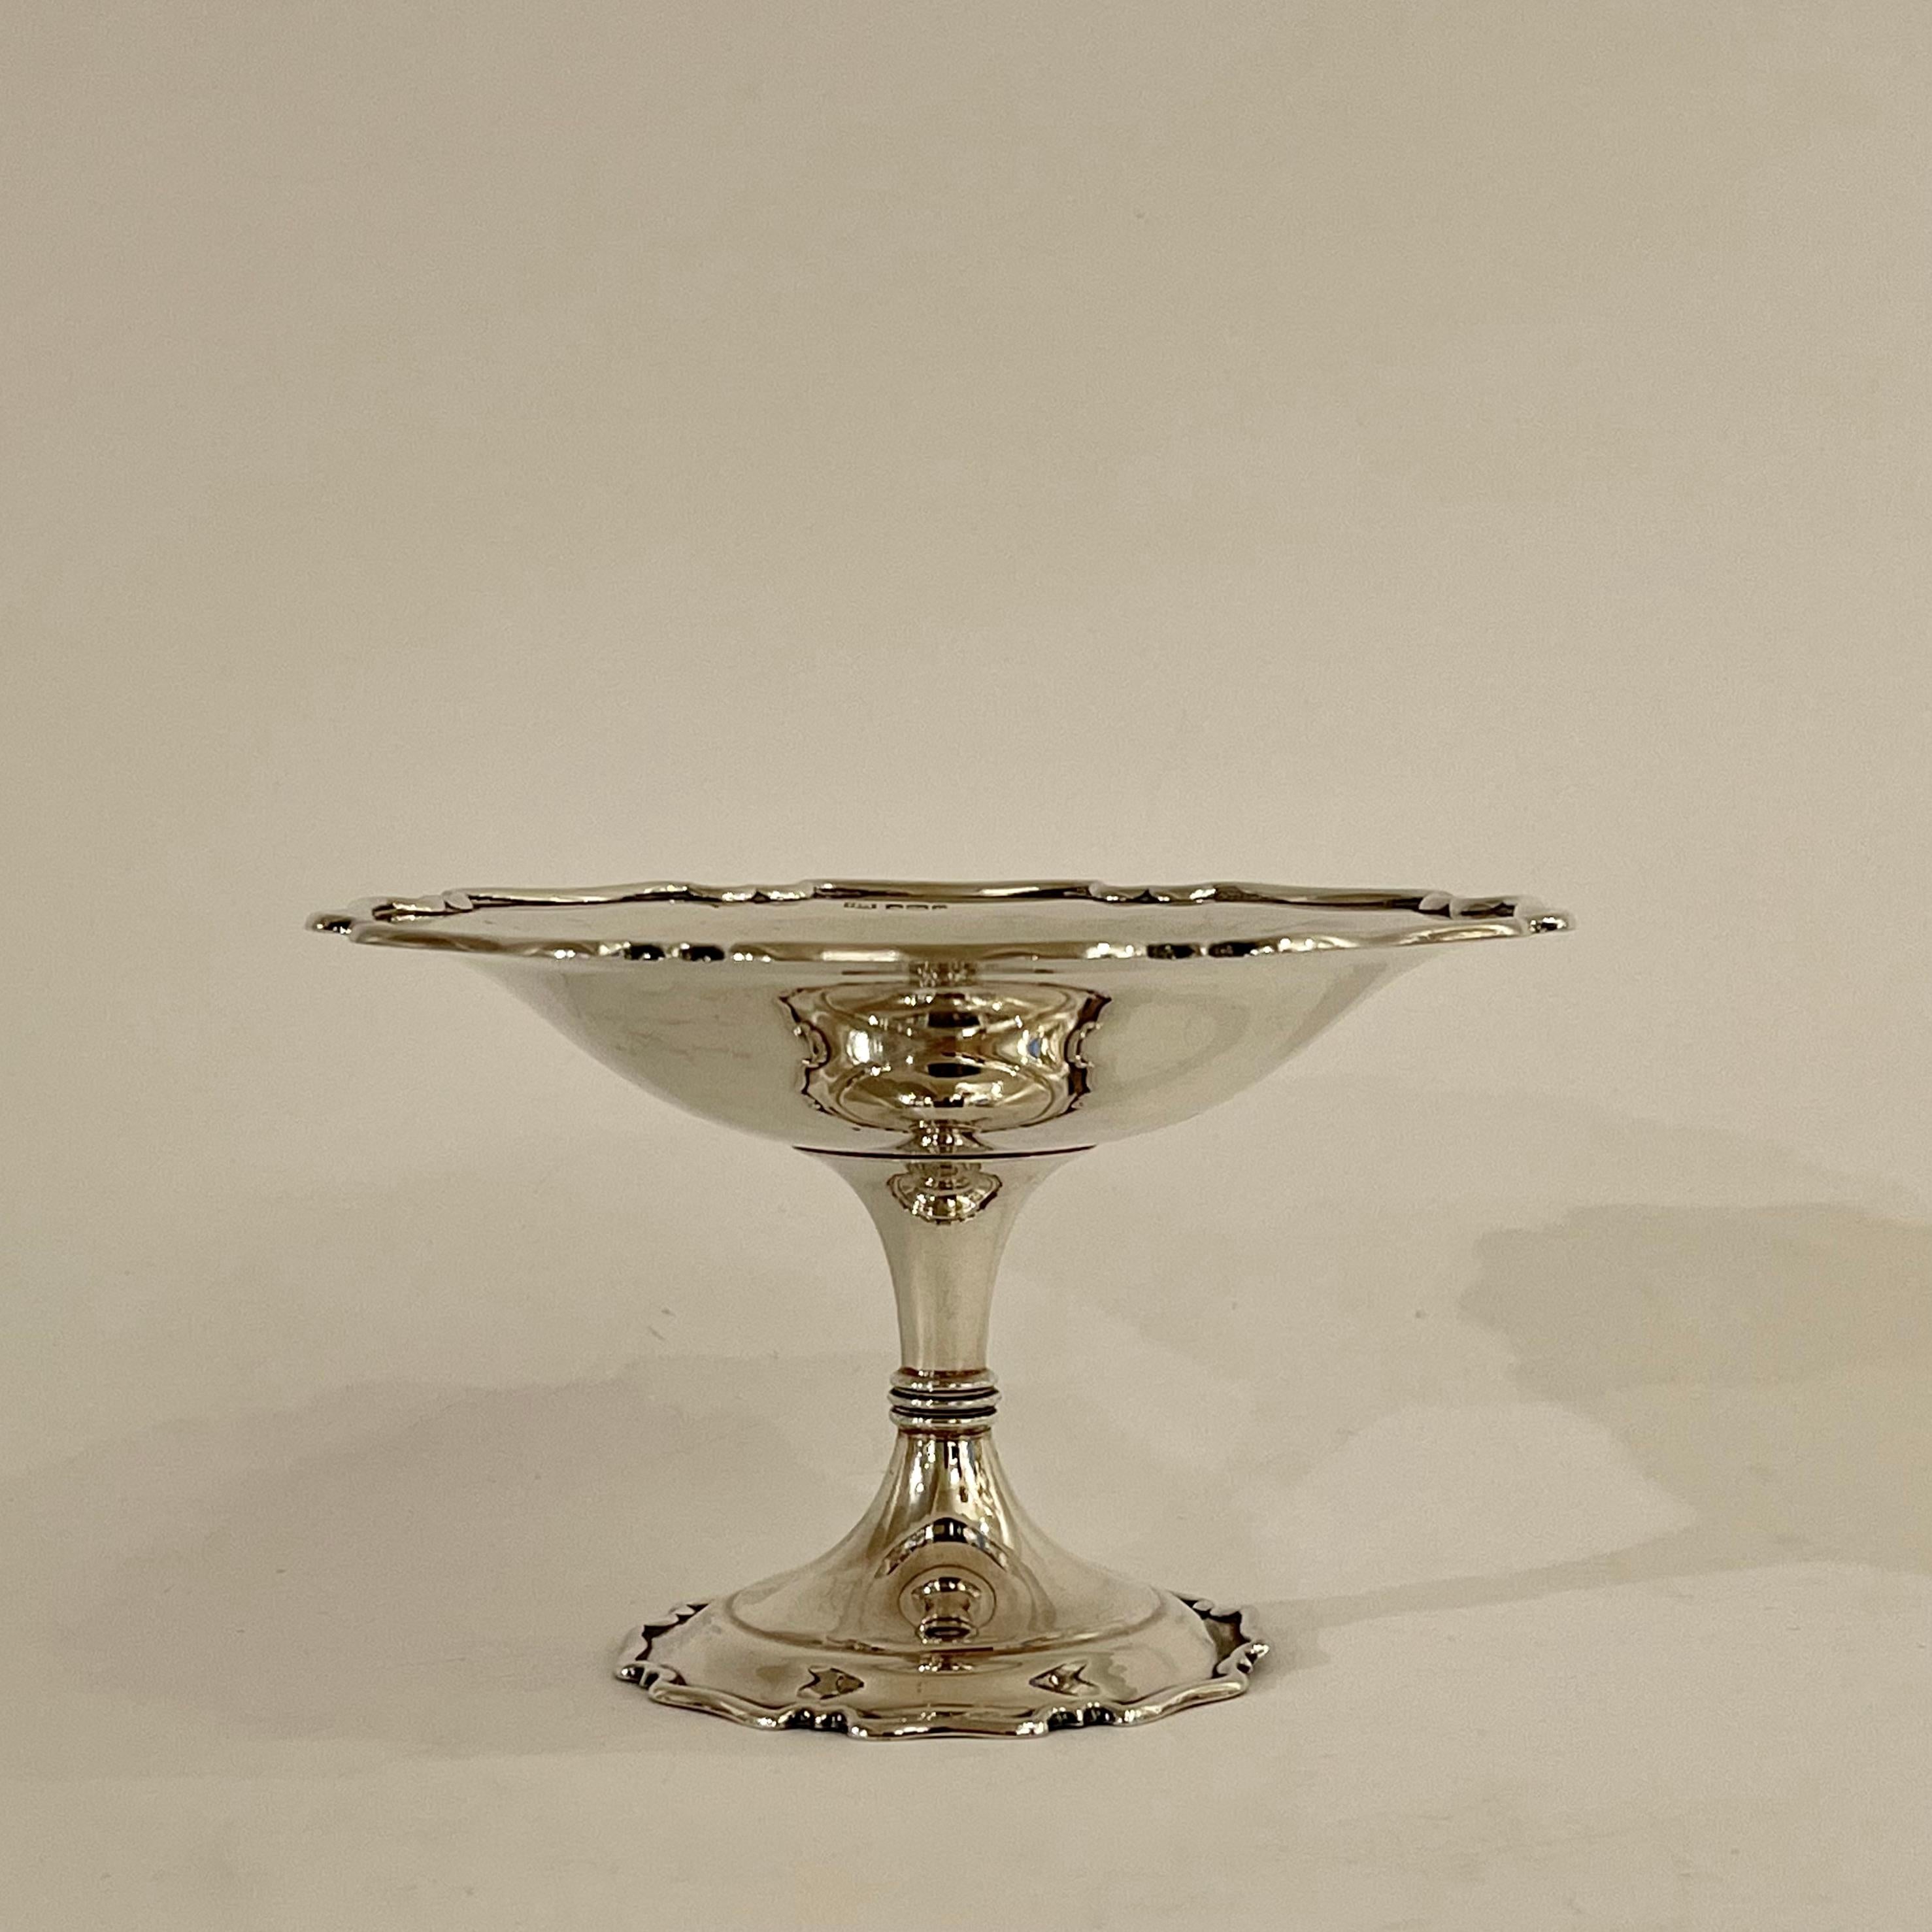 This small solid sterling silver late Edwardian Tazza dish is tastefully edged at the rim of the bowl and the base with a raised lip that ribbons between indented cusped arches. The pedestal steps once and funnels to a thin reeded band at its